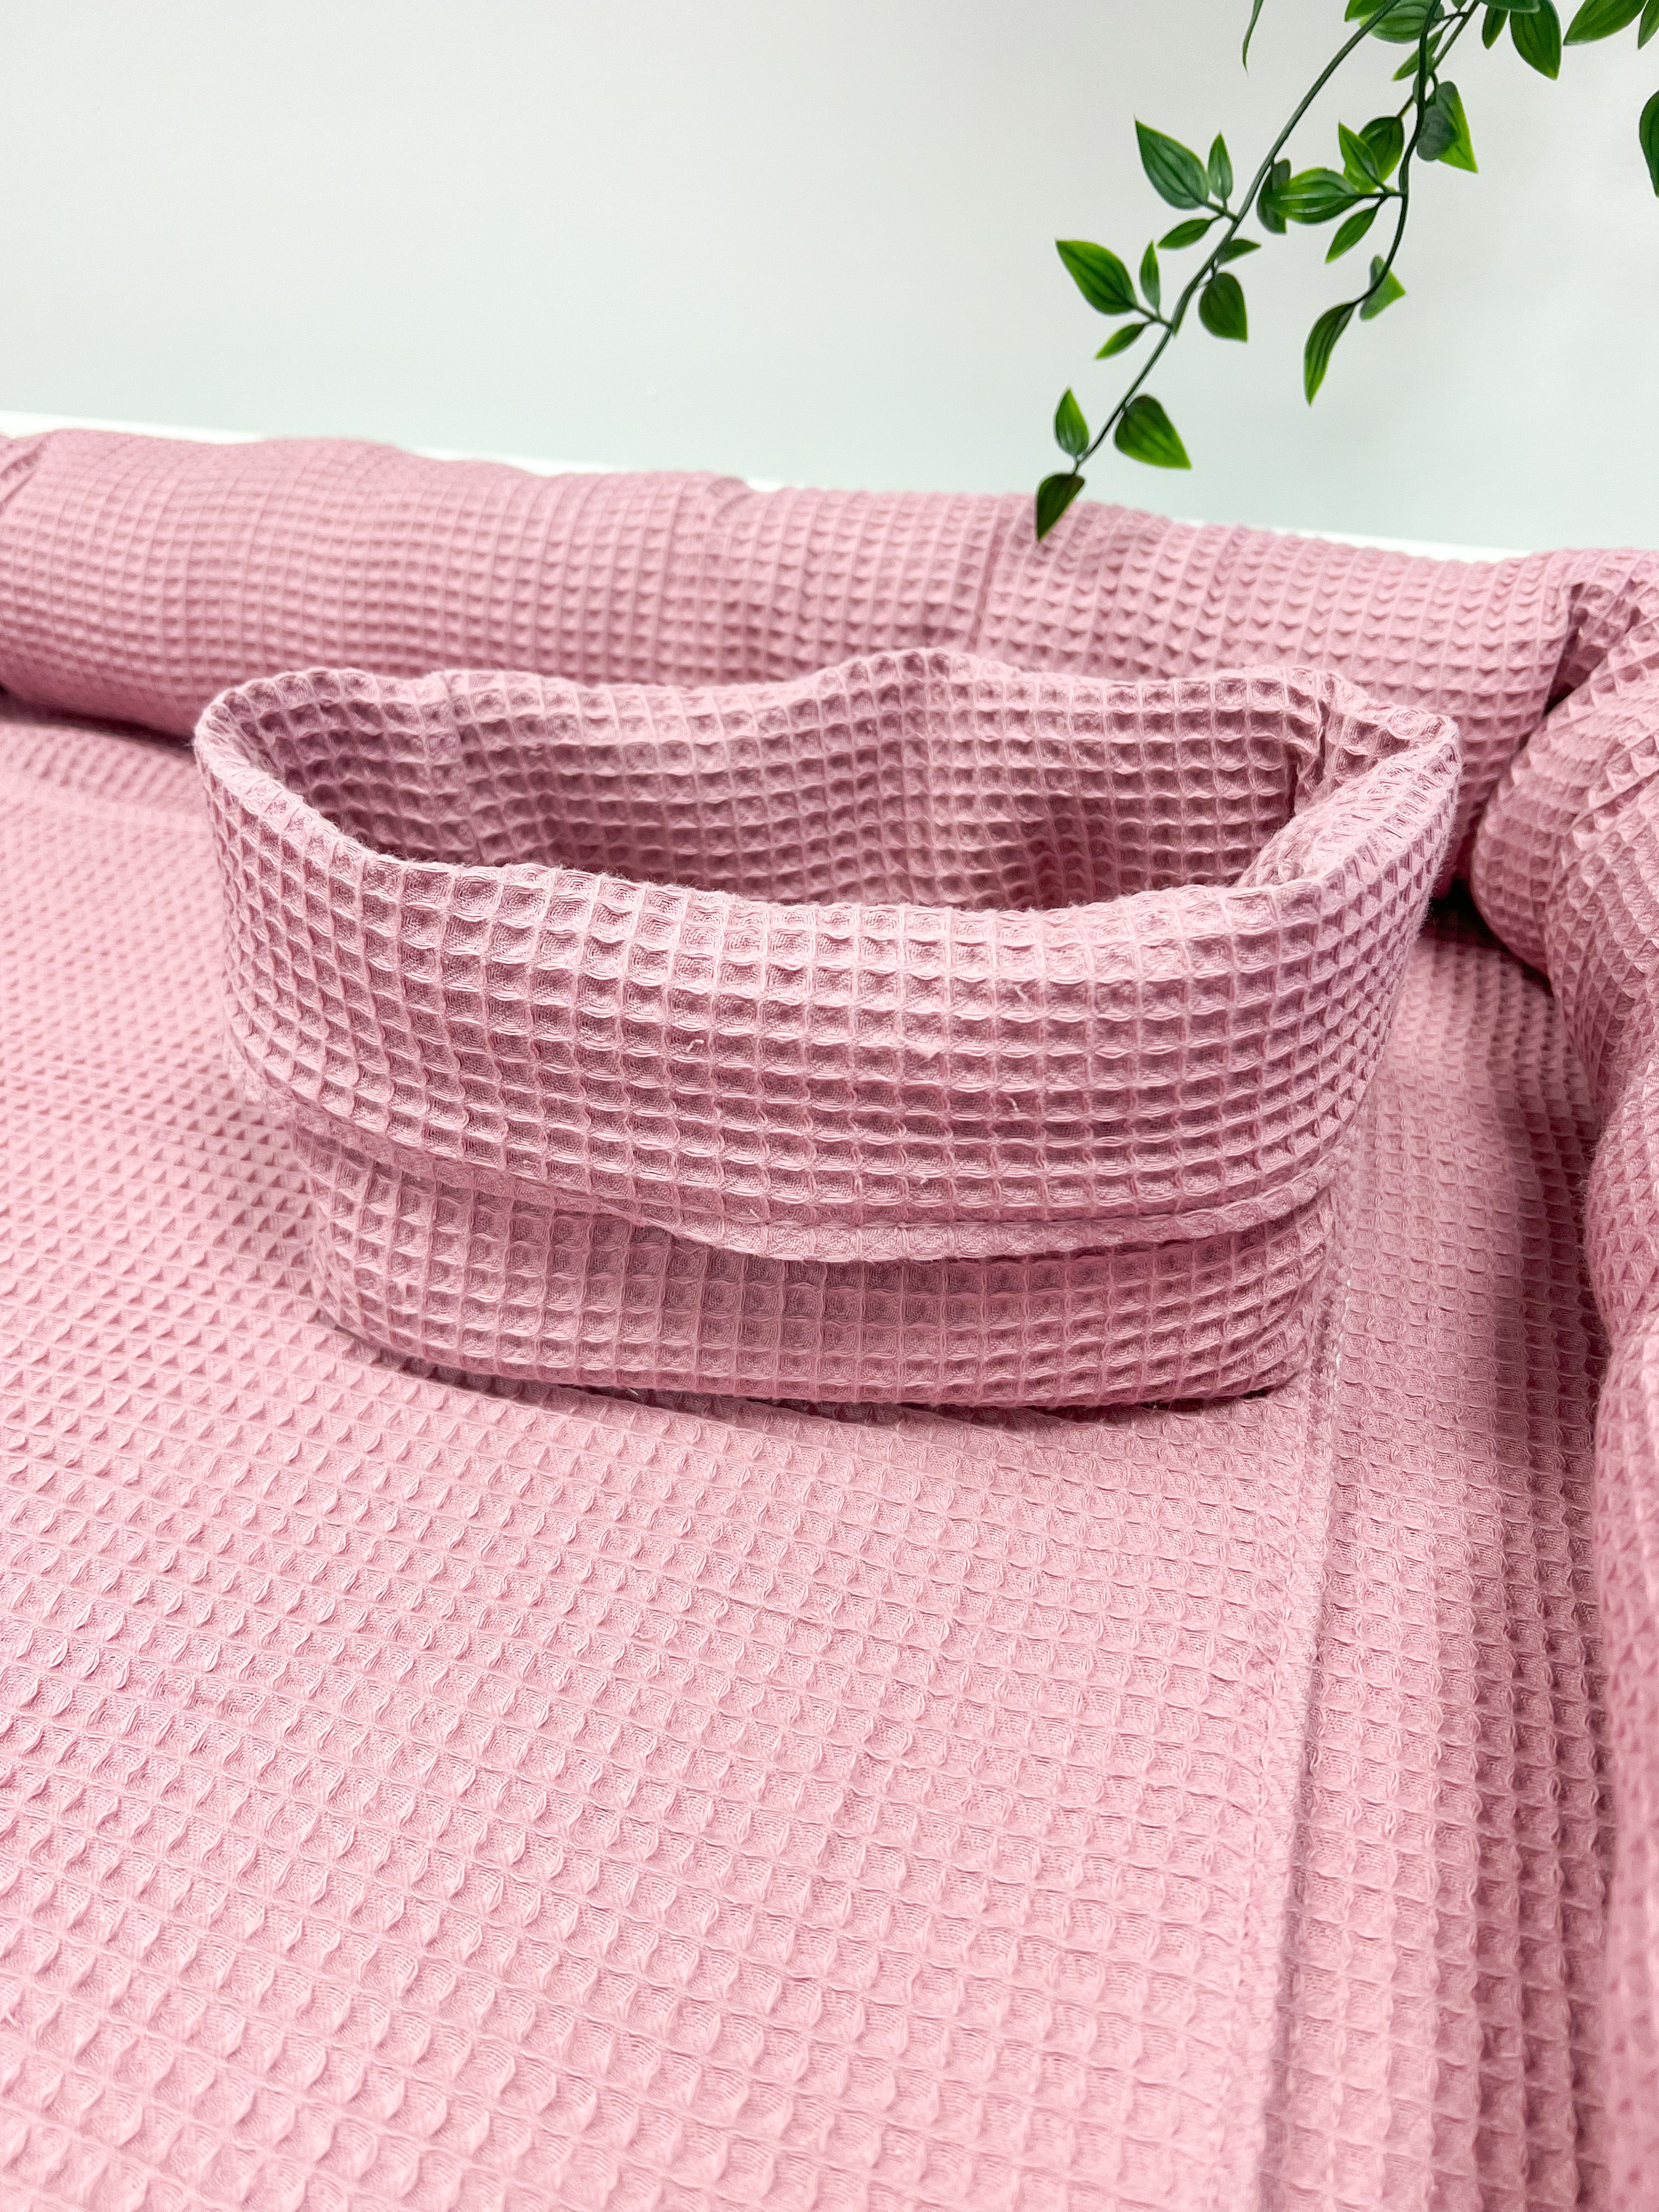 Cotton changing pad - Classic Rose pink